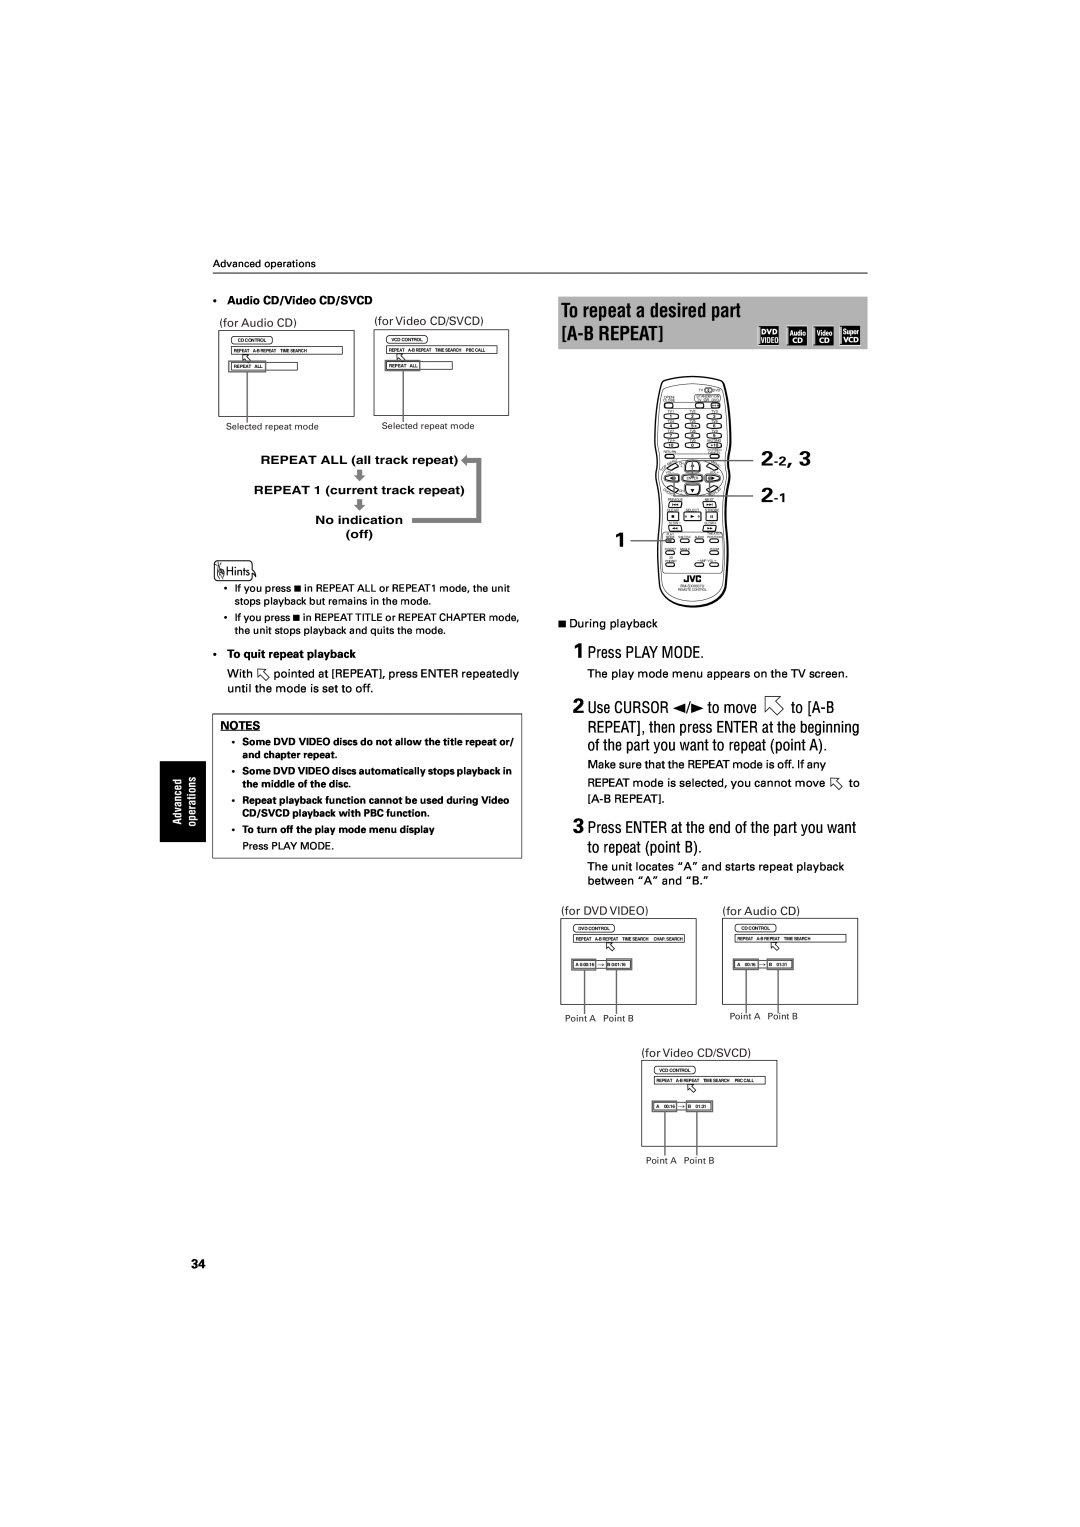 JVC GNT0013-014A manual To repeat a desired part A-B REPEAT, 2 -2, Press PLAY MODE, Audio CD/Video CD/SVCD, for Audio CD 